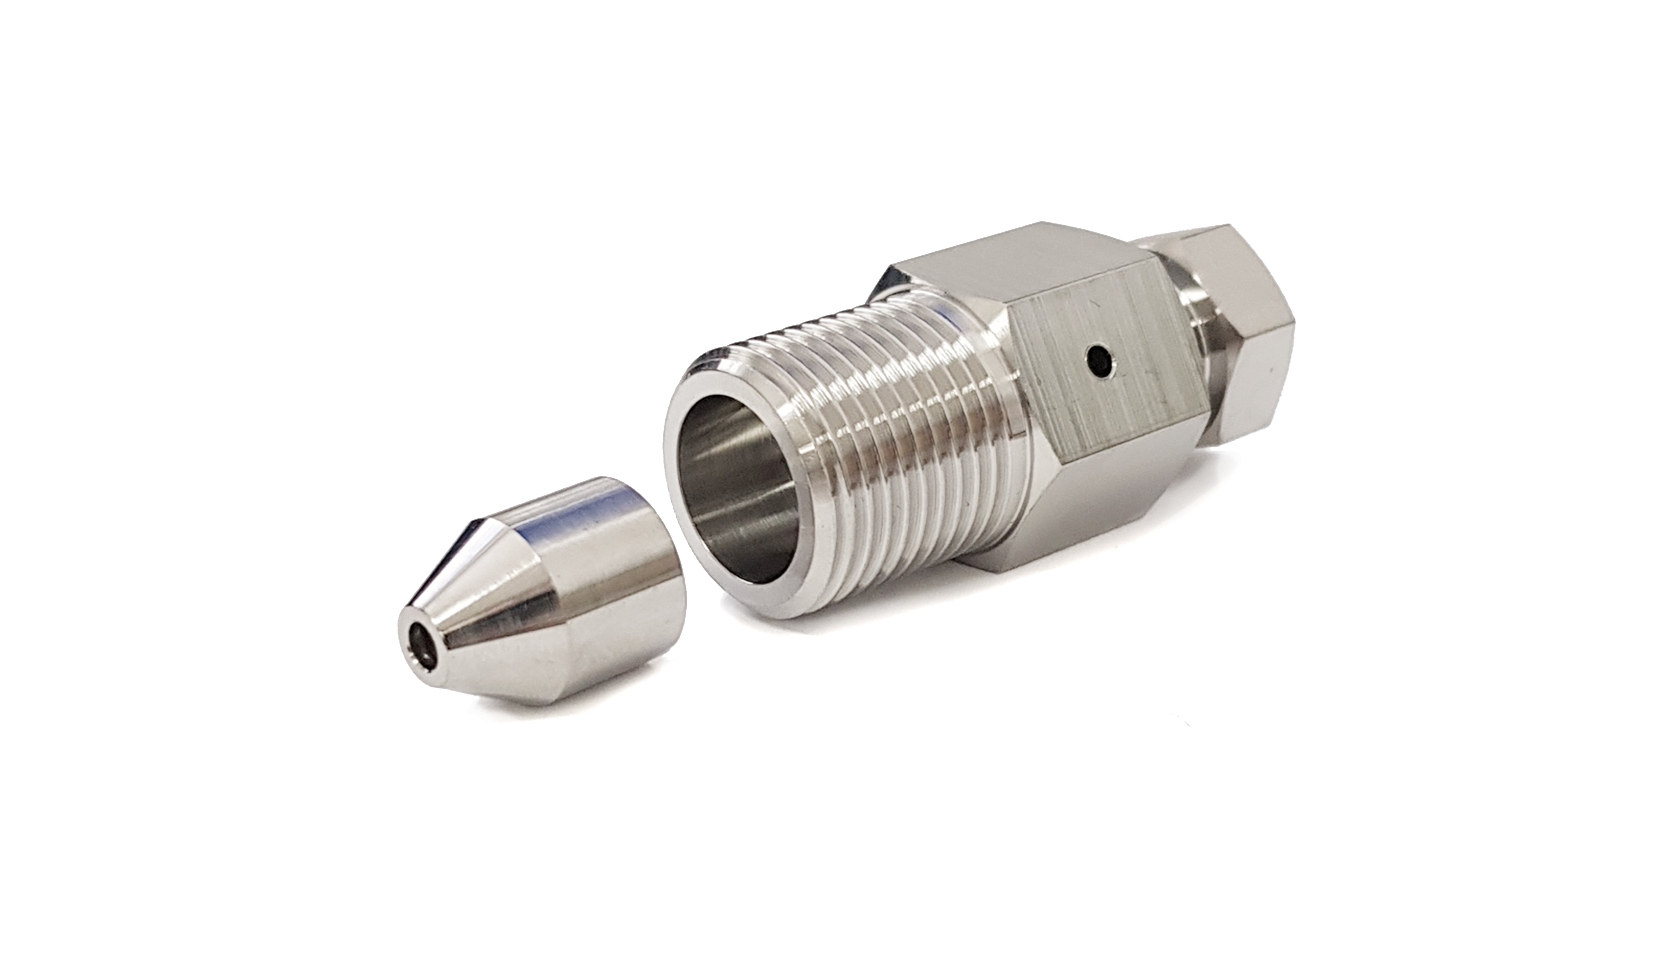 18009-C / A-0792-1 / Adapter, 1/4"-3/8" (f-m), Cone exchangeable